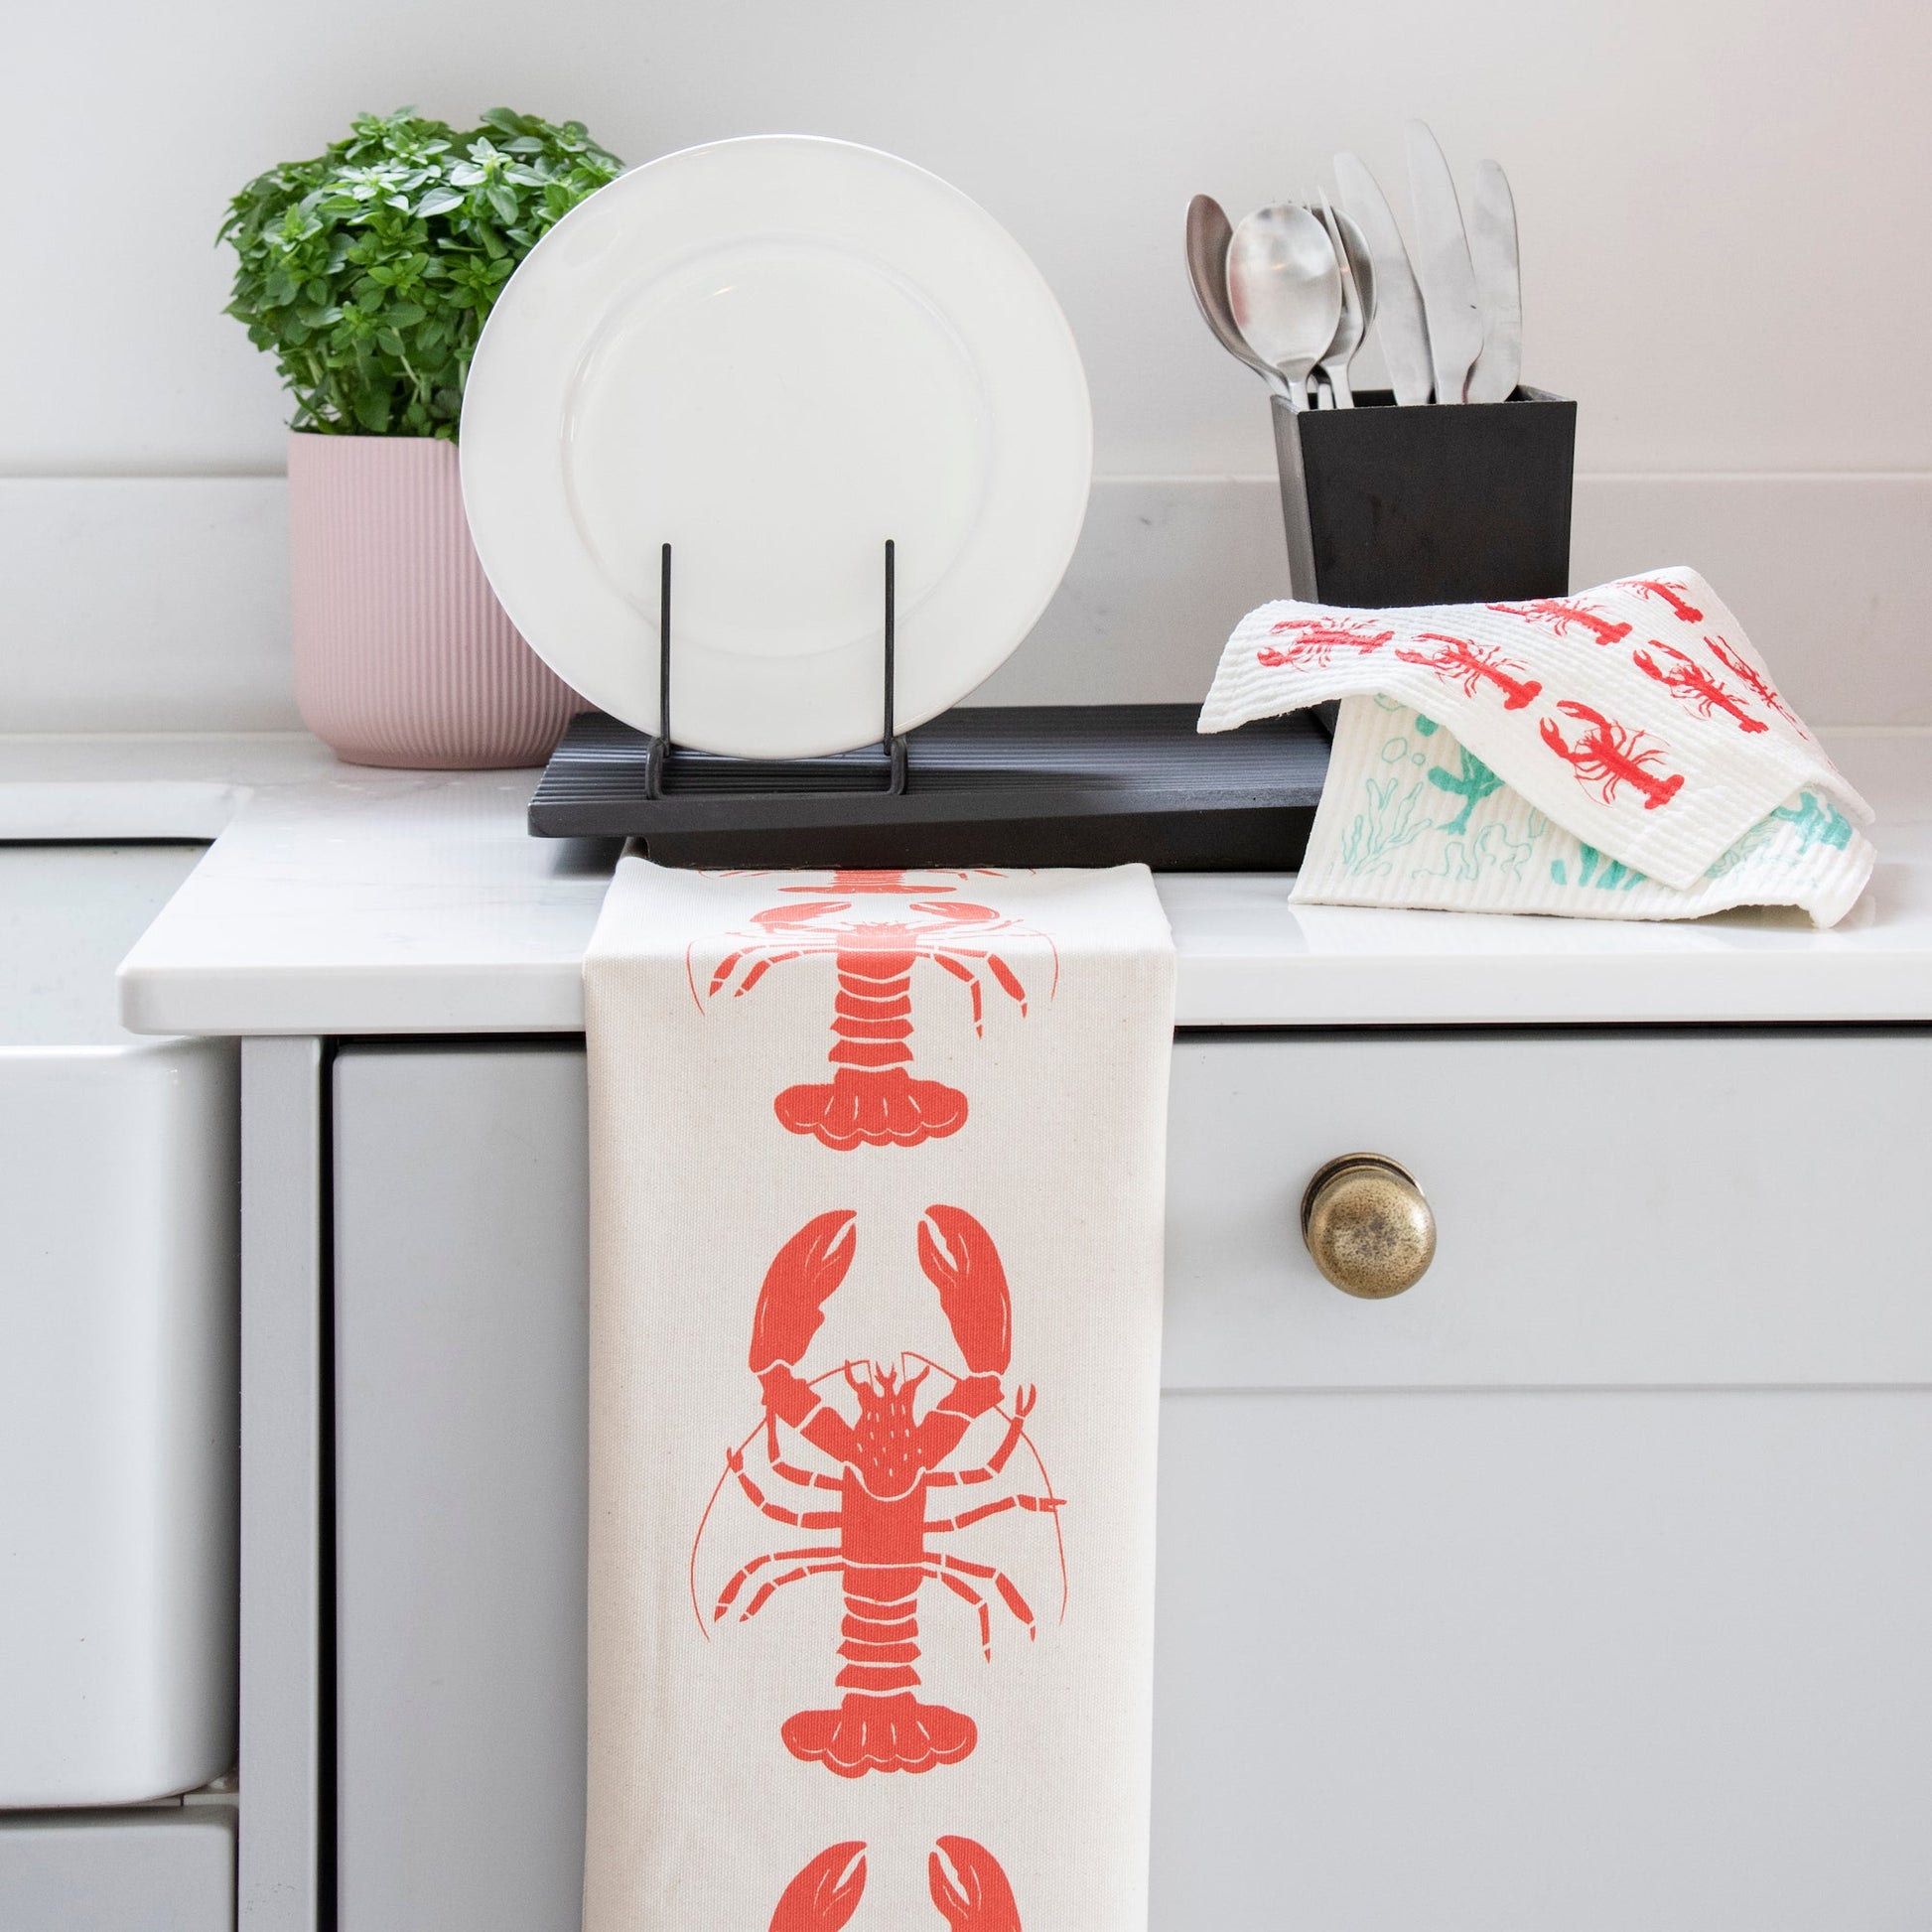 Organic Cotton Tea Towel with Lobster design and eco friendly compostable dishcloths